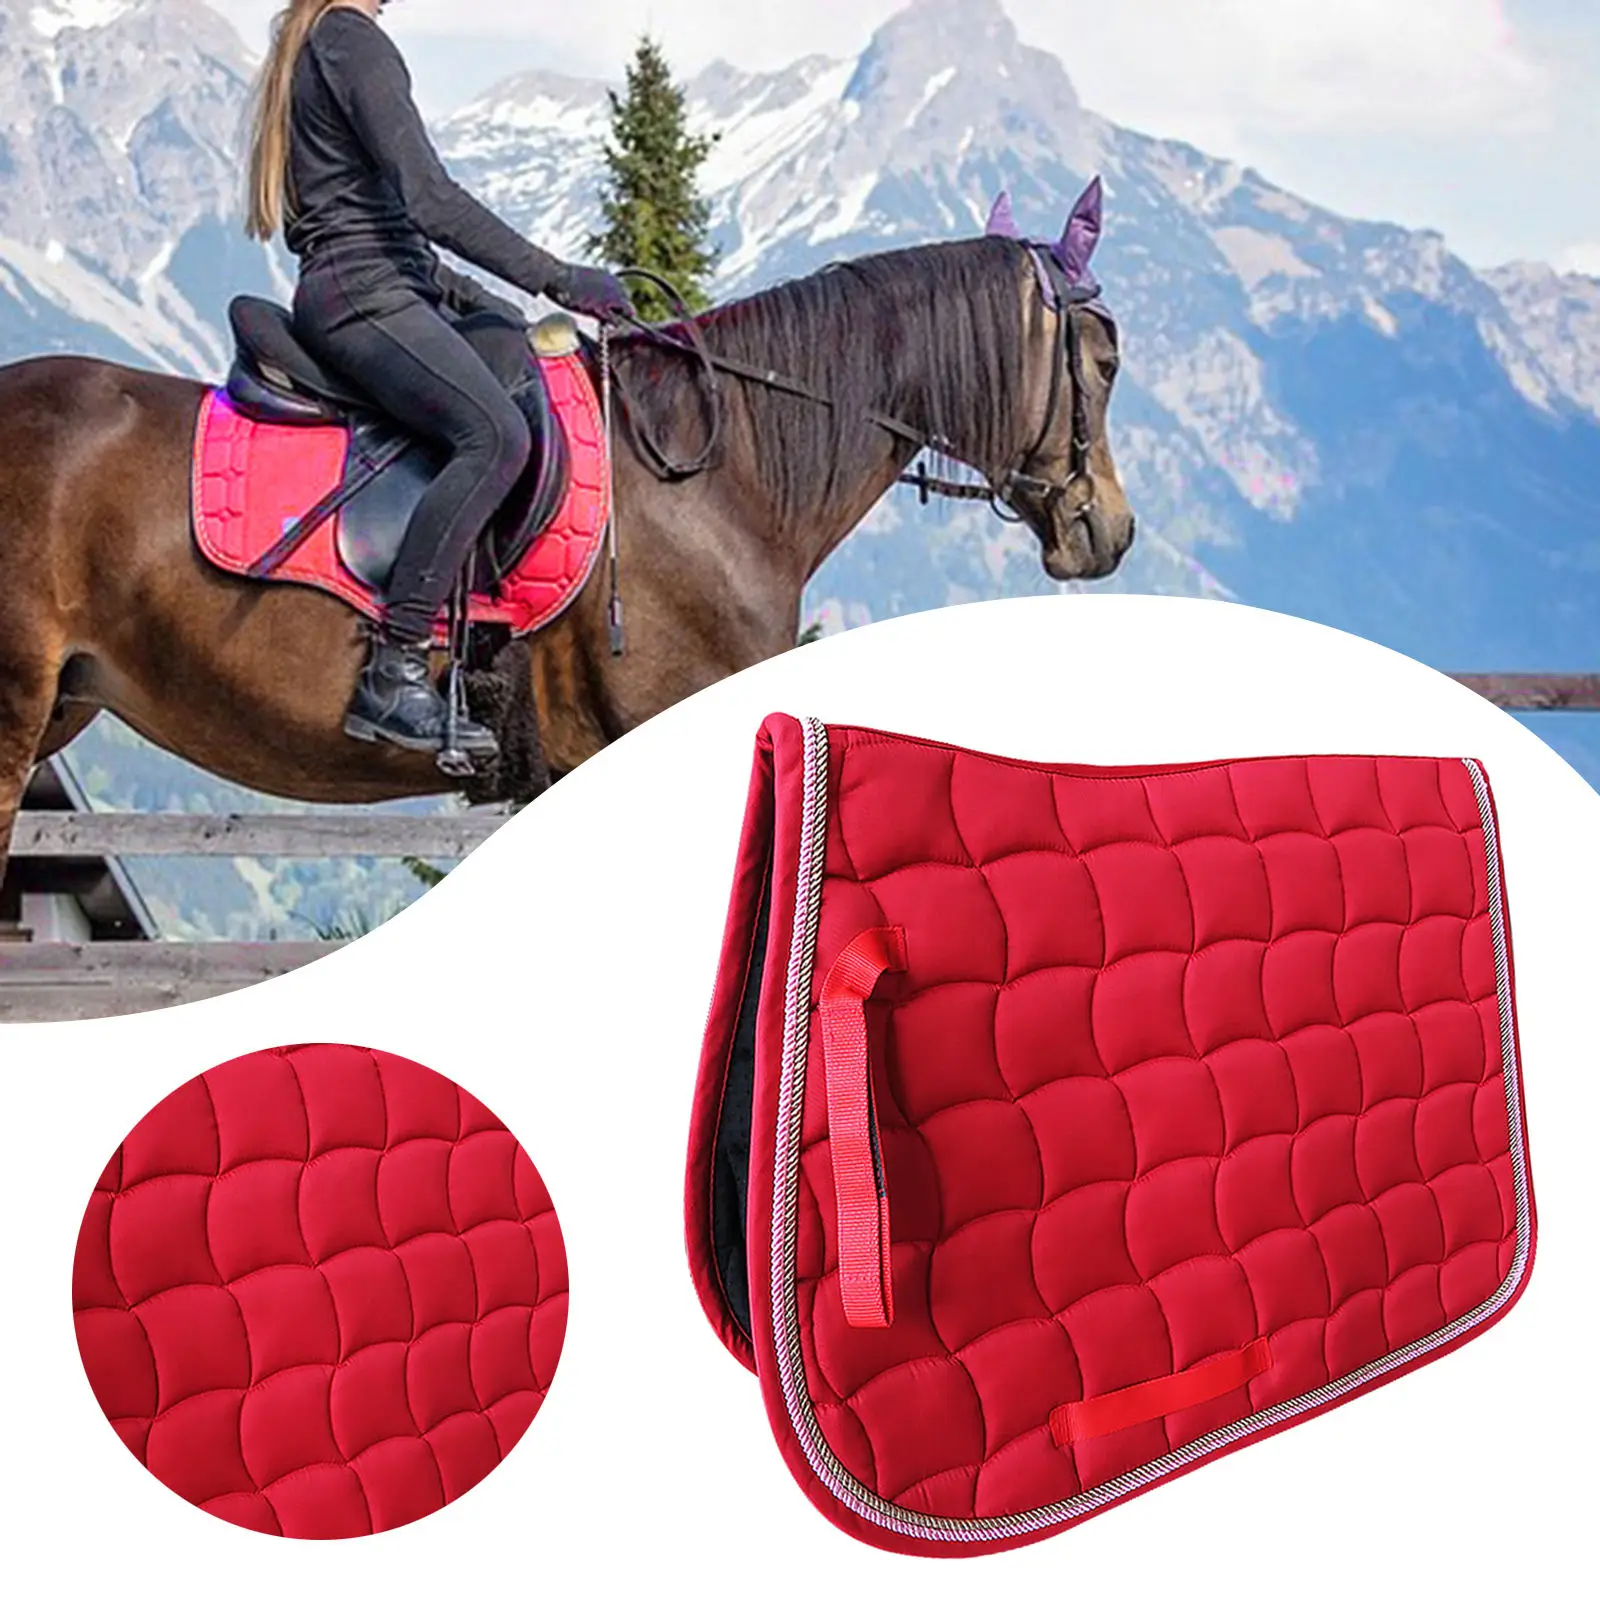 Protective Cushion Horse Riding Sweat Cushion Saddle Absorbing Horse Riding Jumping Performance Accessories